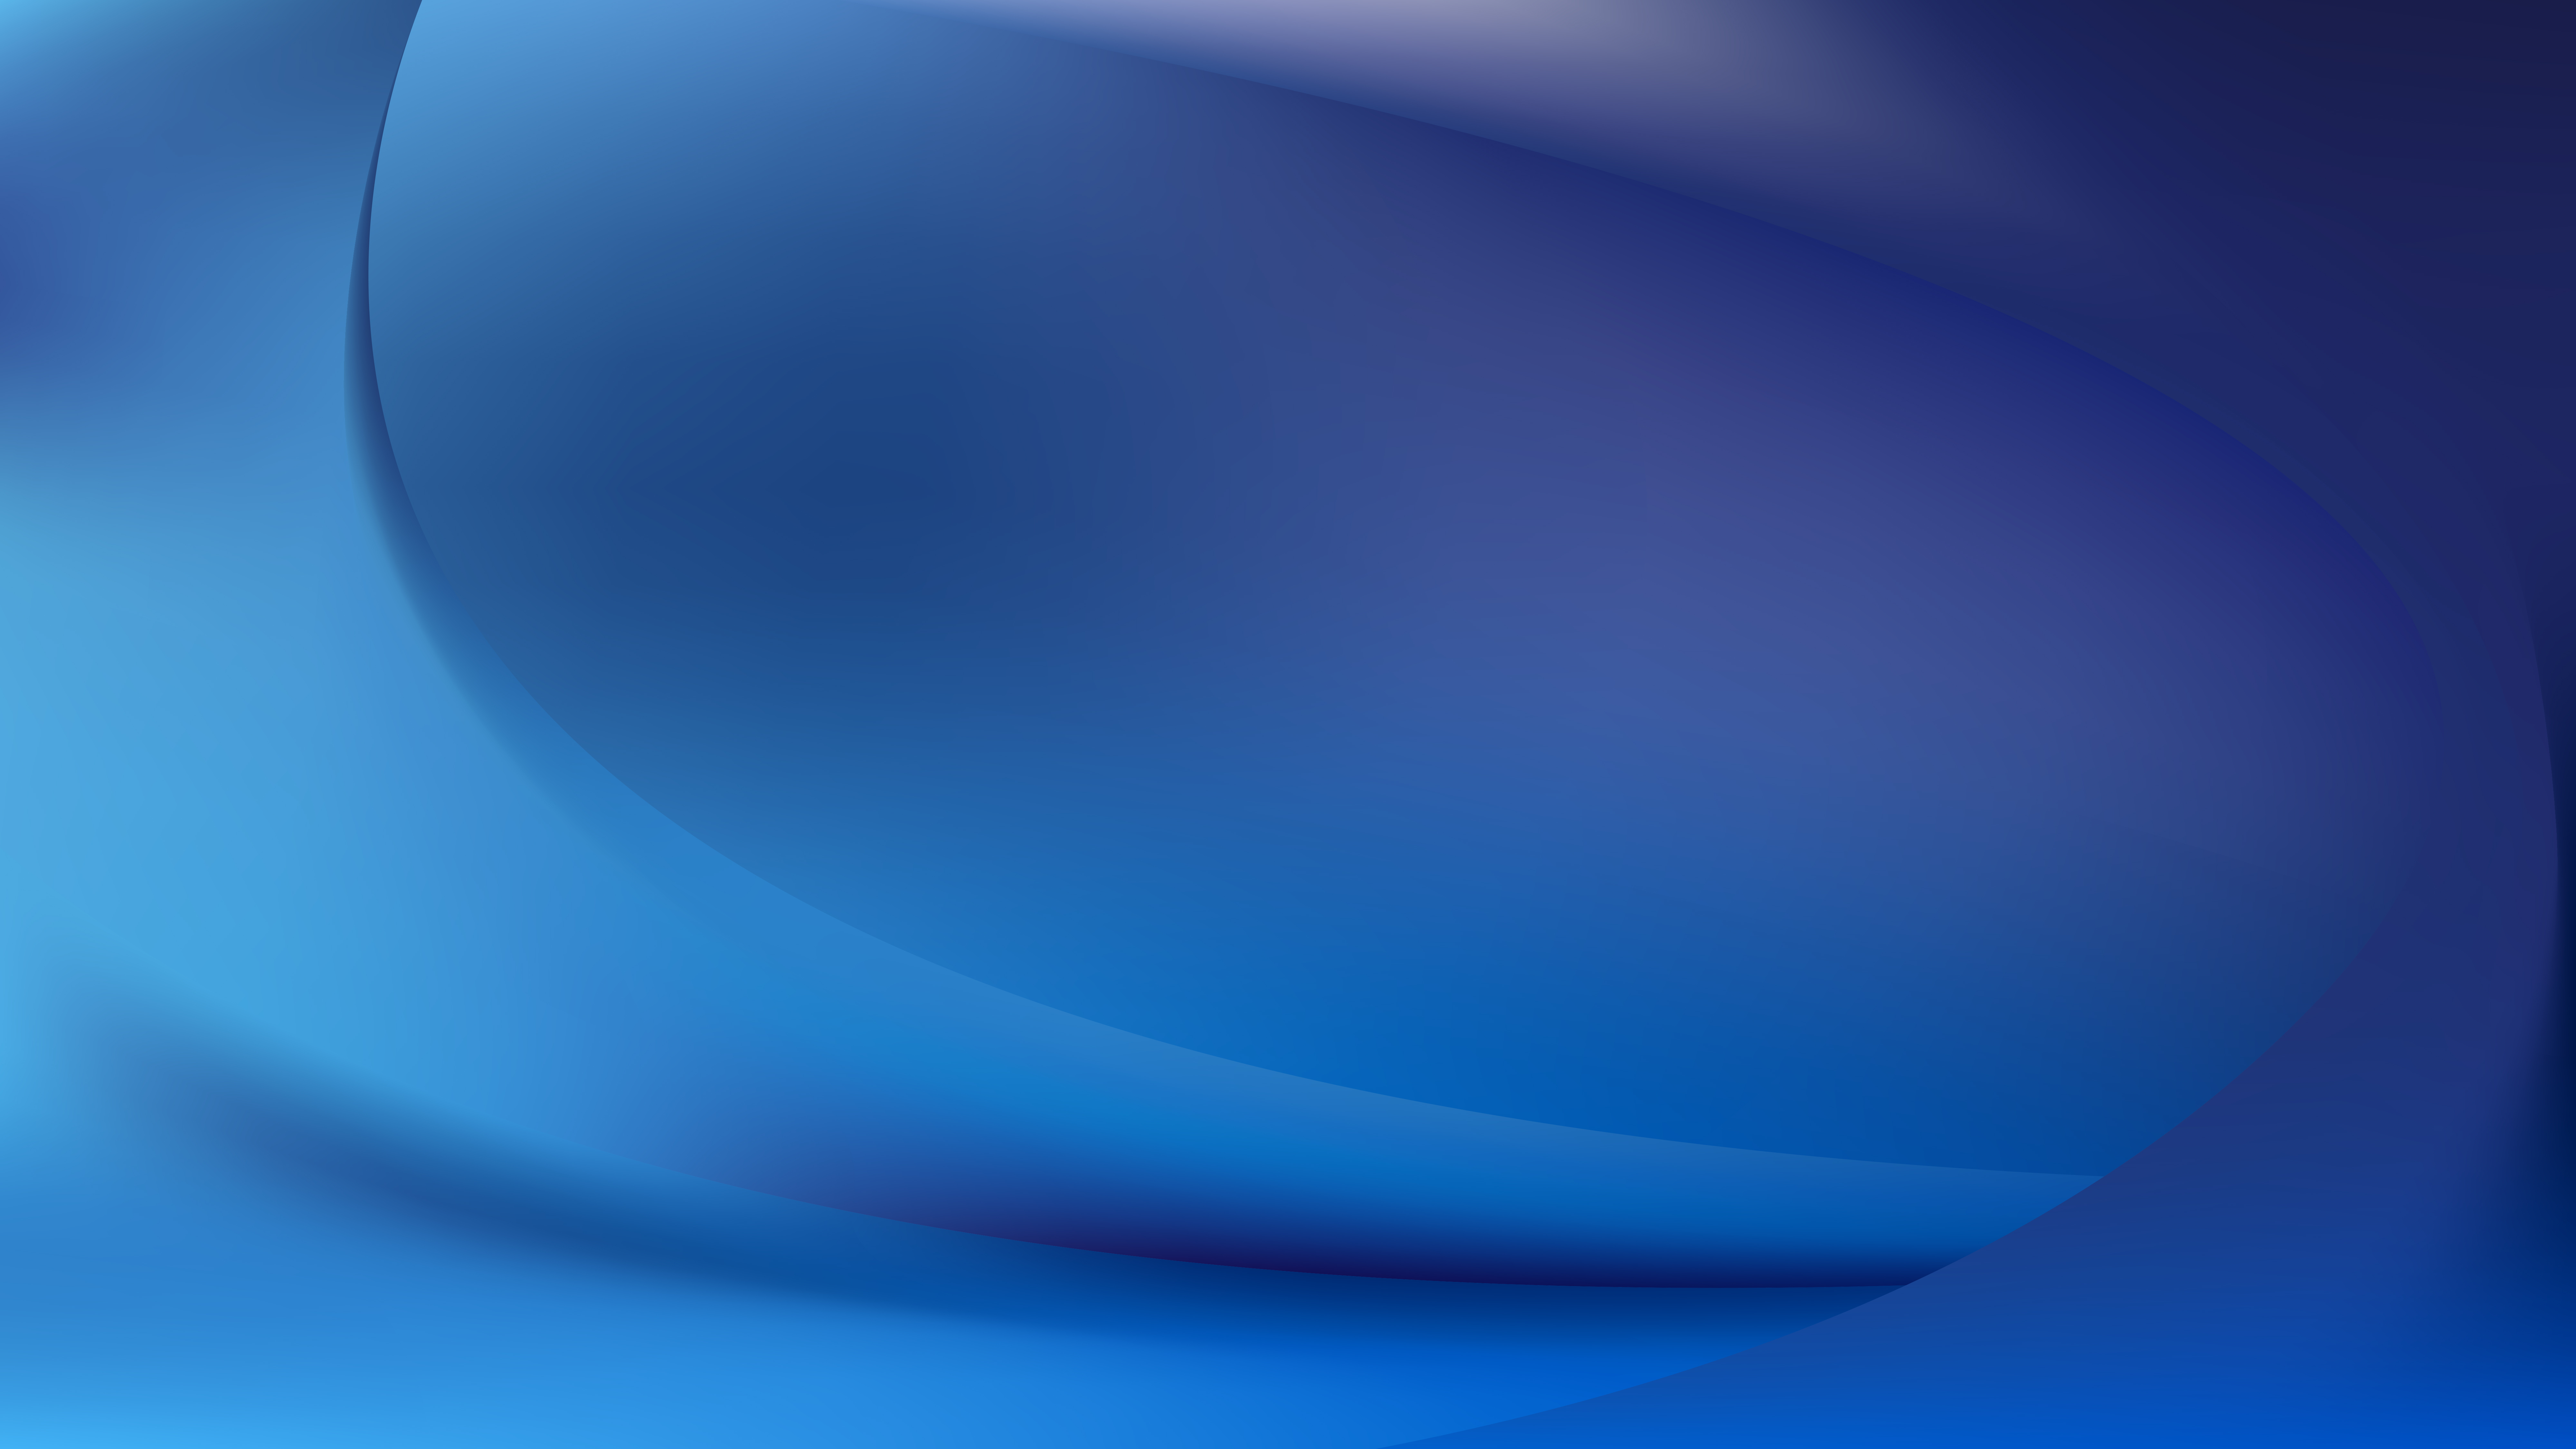 Free Dark Blue Abstract Curve Background